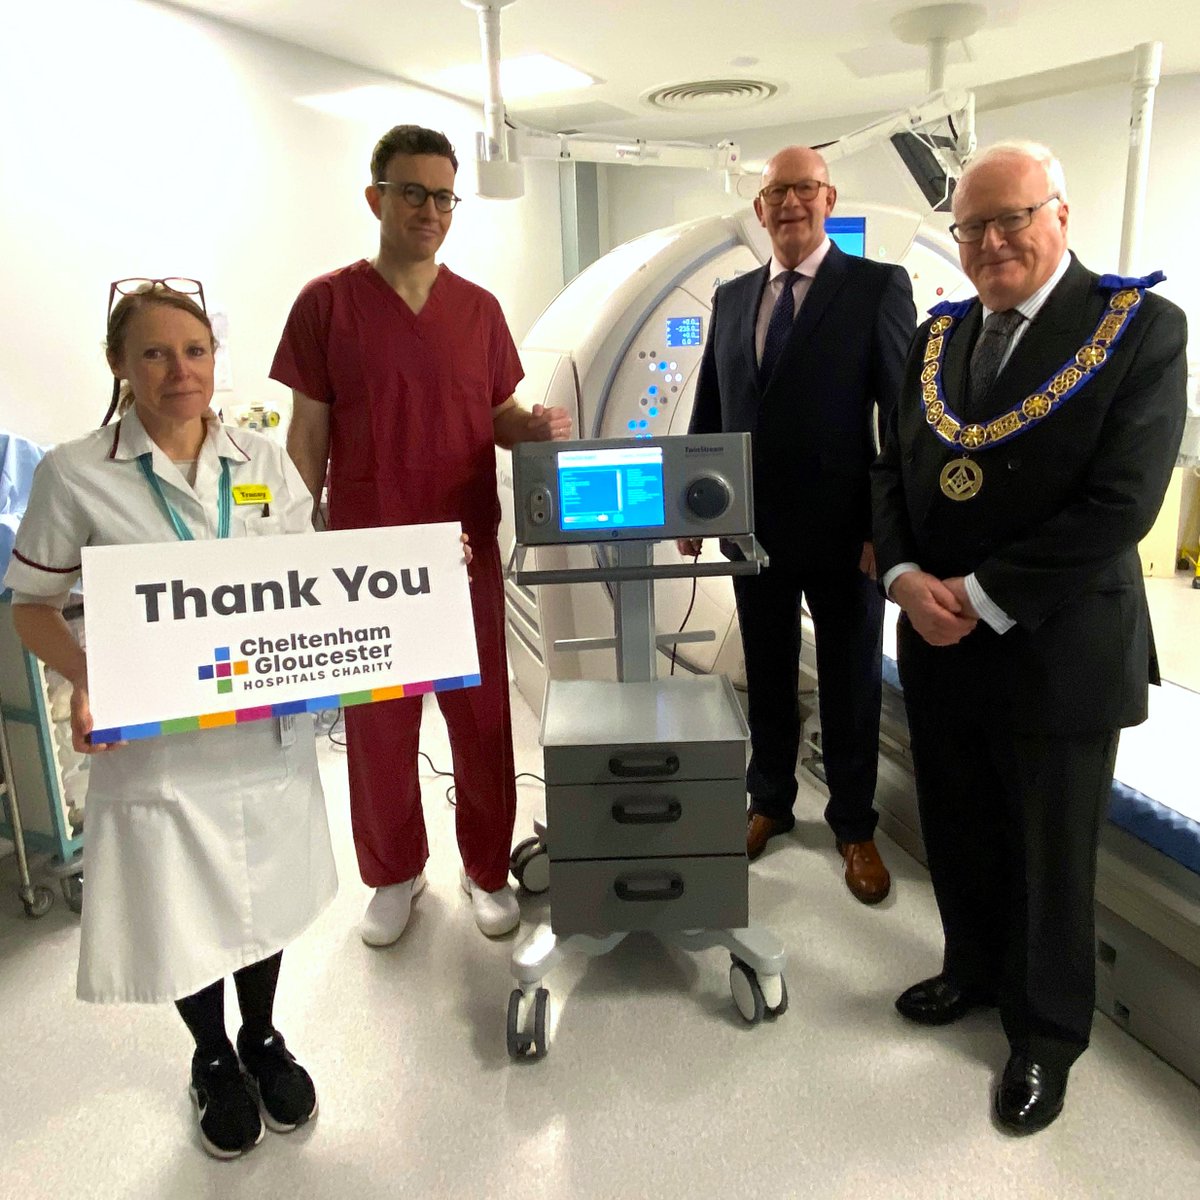 Thanks to @GlosMason, a state-of-the-art jet ventilator has been funded to help transform cancer treatment for local patients 💙 “The jet ventilator allows for the treatment of difficult tumours more accurately, increasing our confidence to treat challenging lesions.' (1/2)